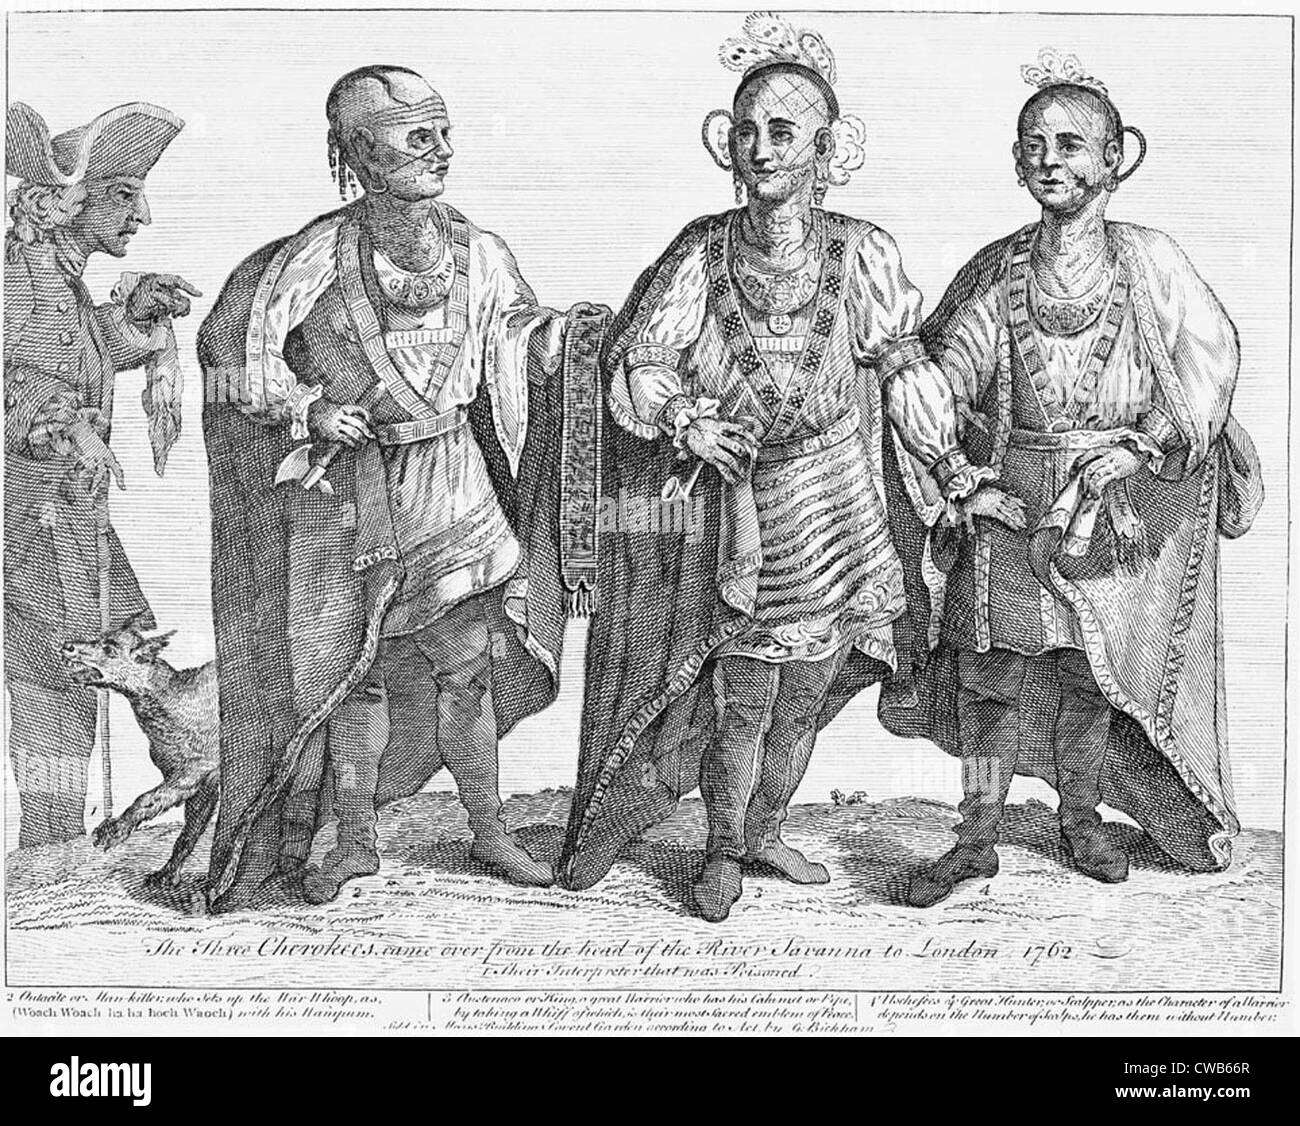 Cherokee Tribe. 'Three Cherokees Came Over from the Head of the River Savannah to London' Austenaco (second from right), Stock Photo